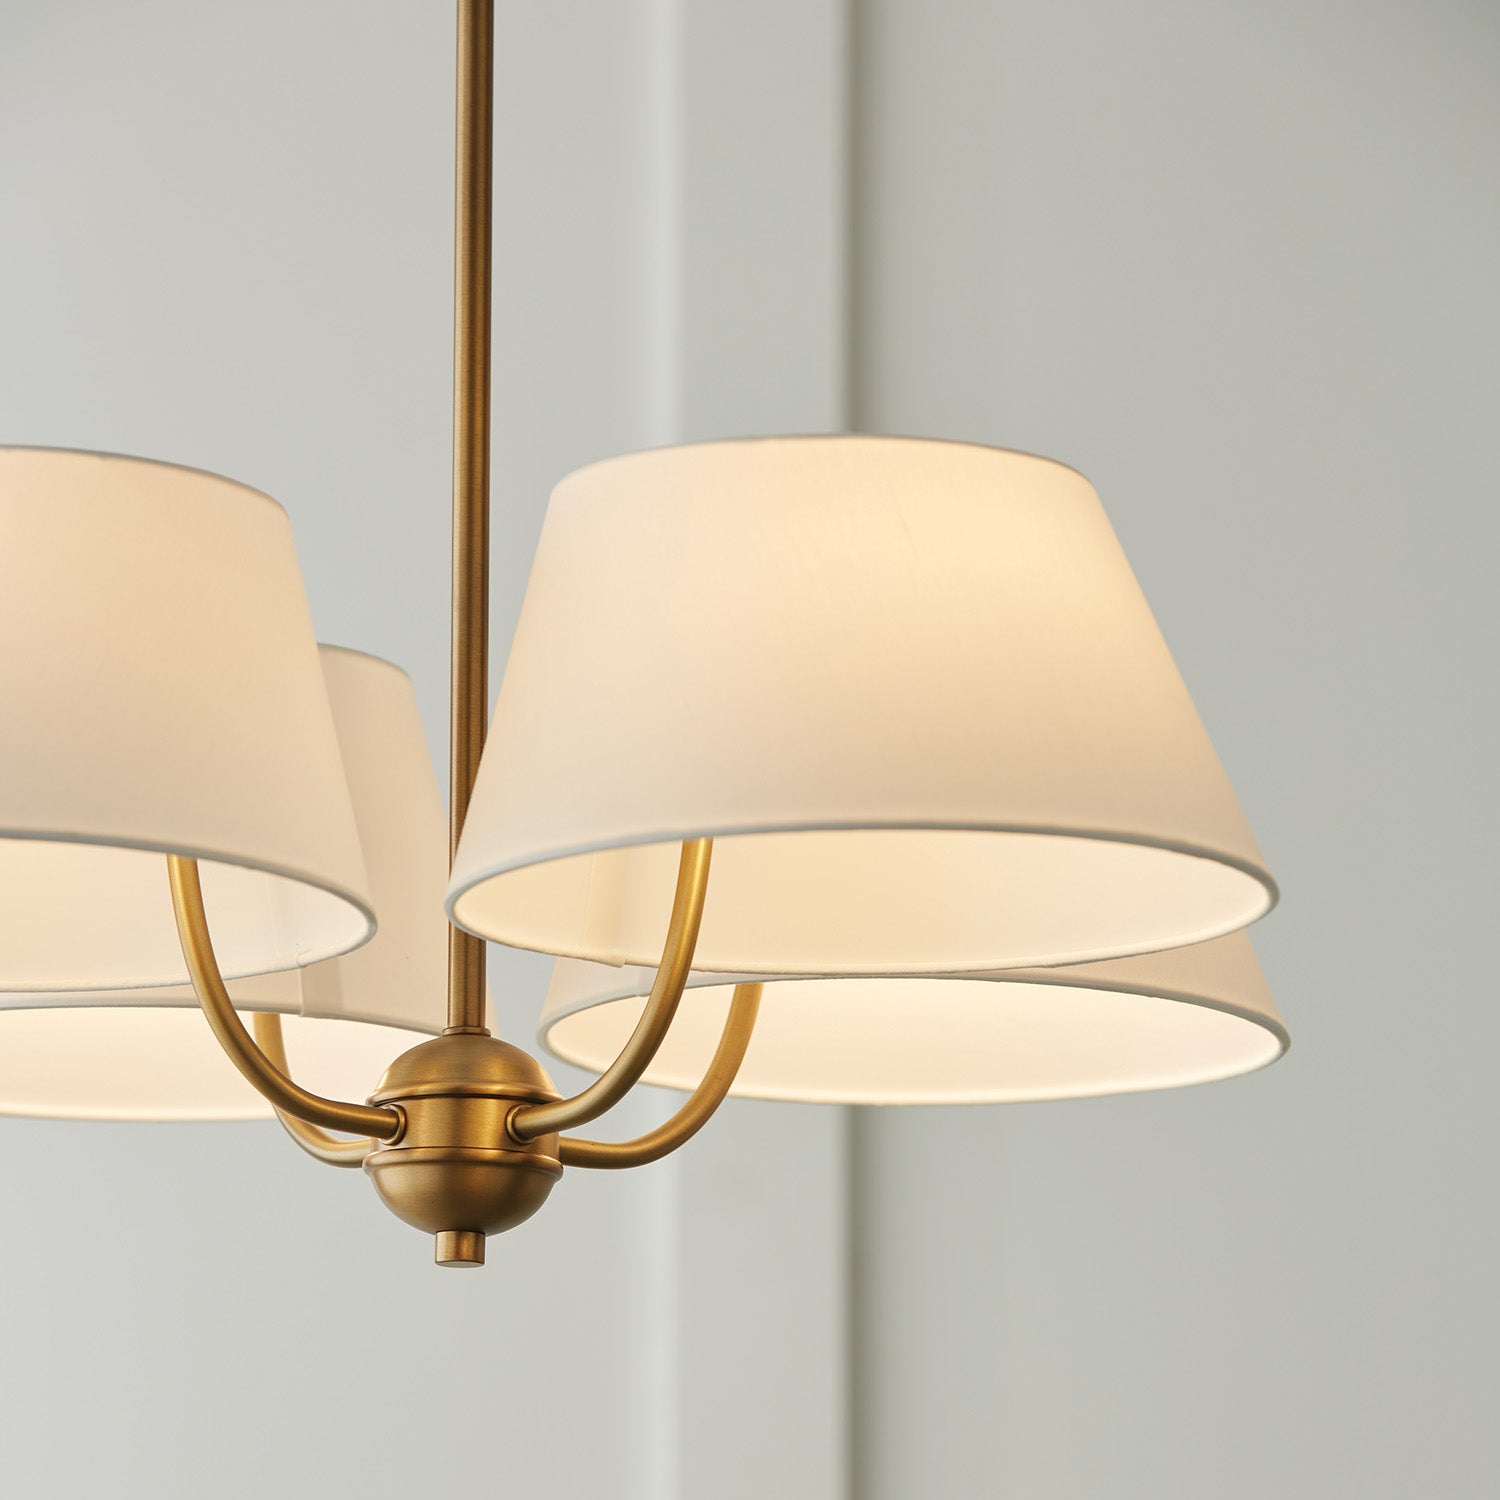 Welsley Aged Brass Chandelier Collection